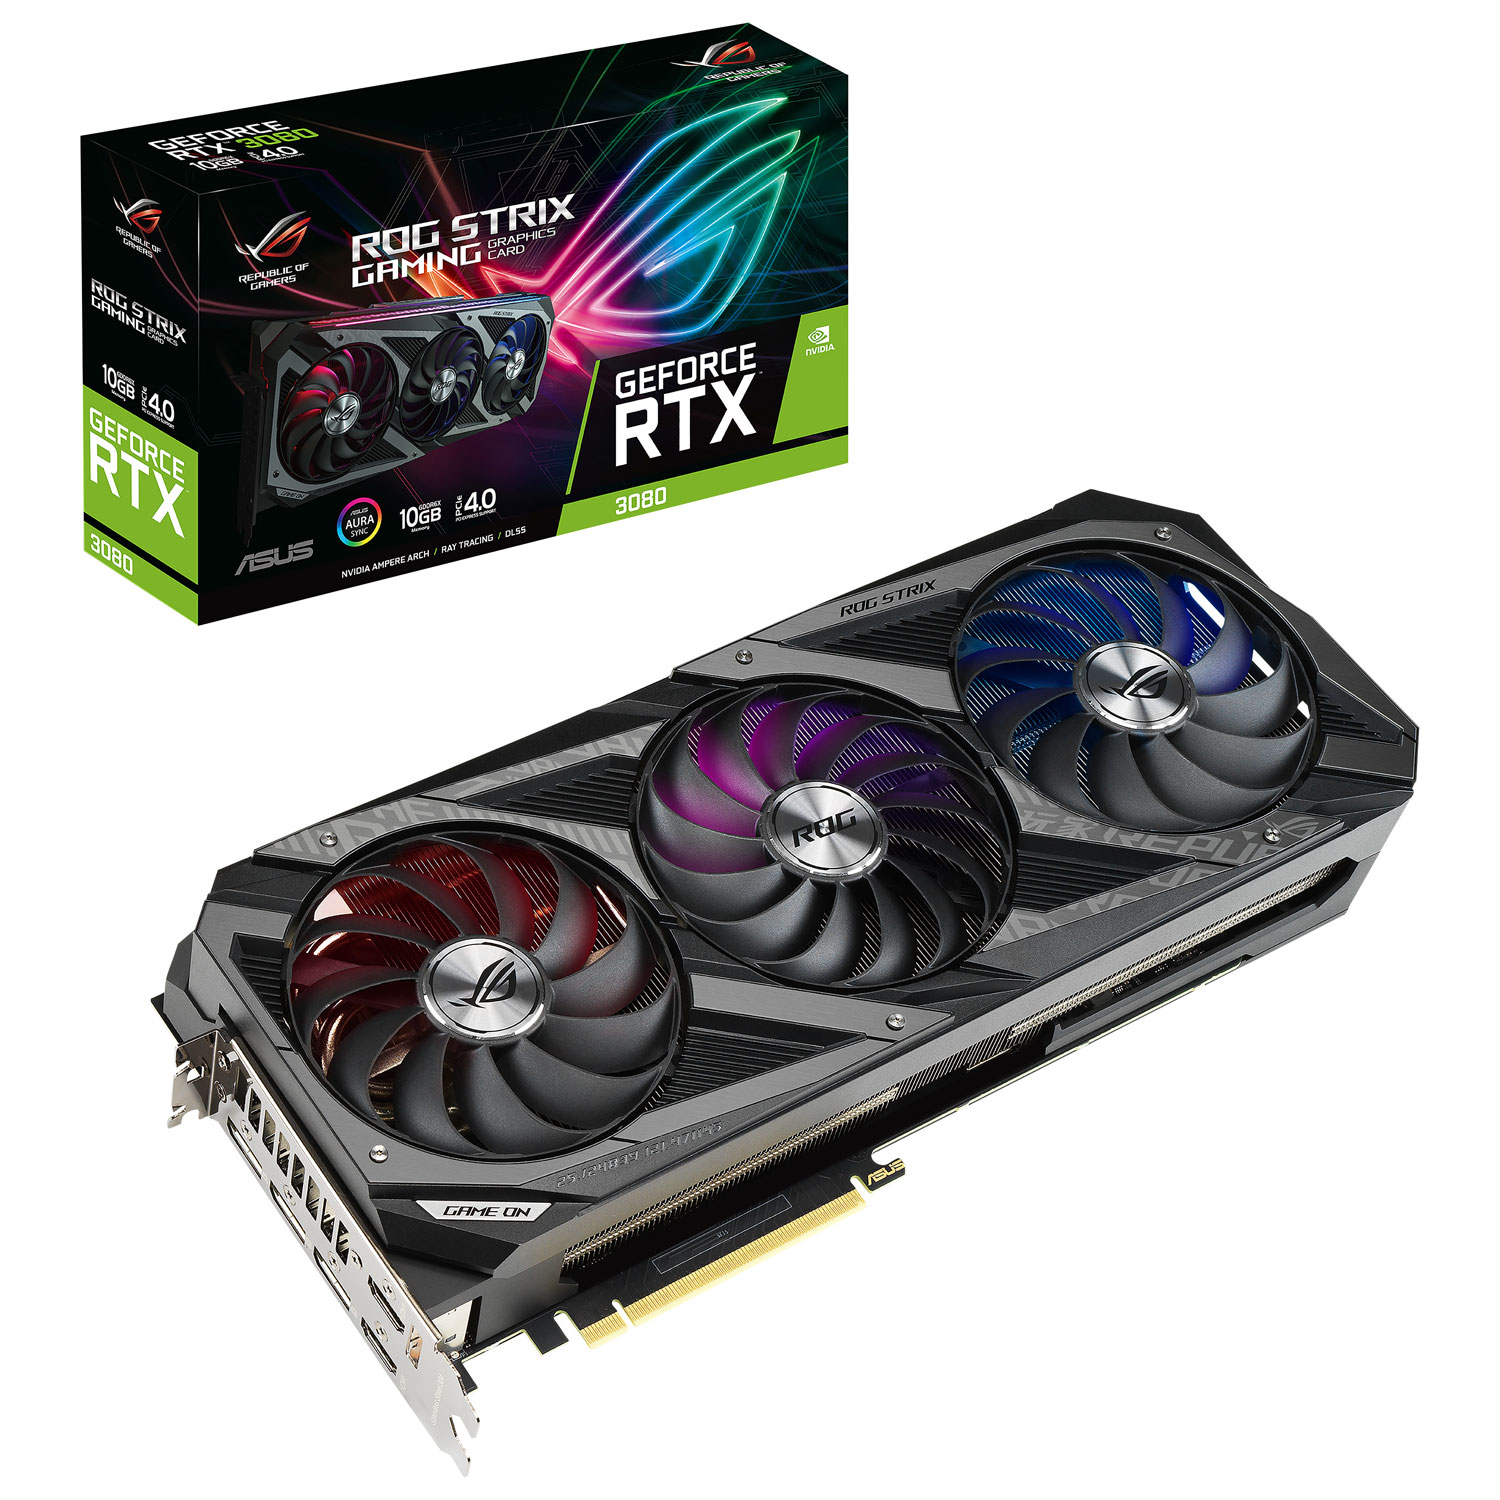 Rtx 3080 - Where to Buy it at the Best Price in Canada?